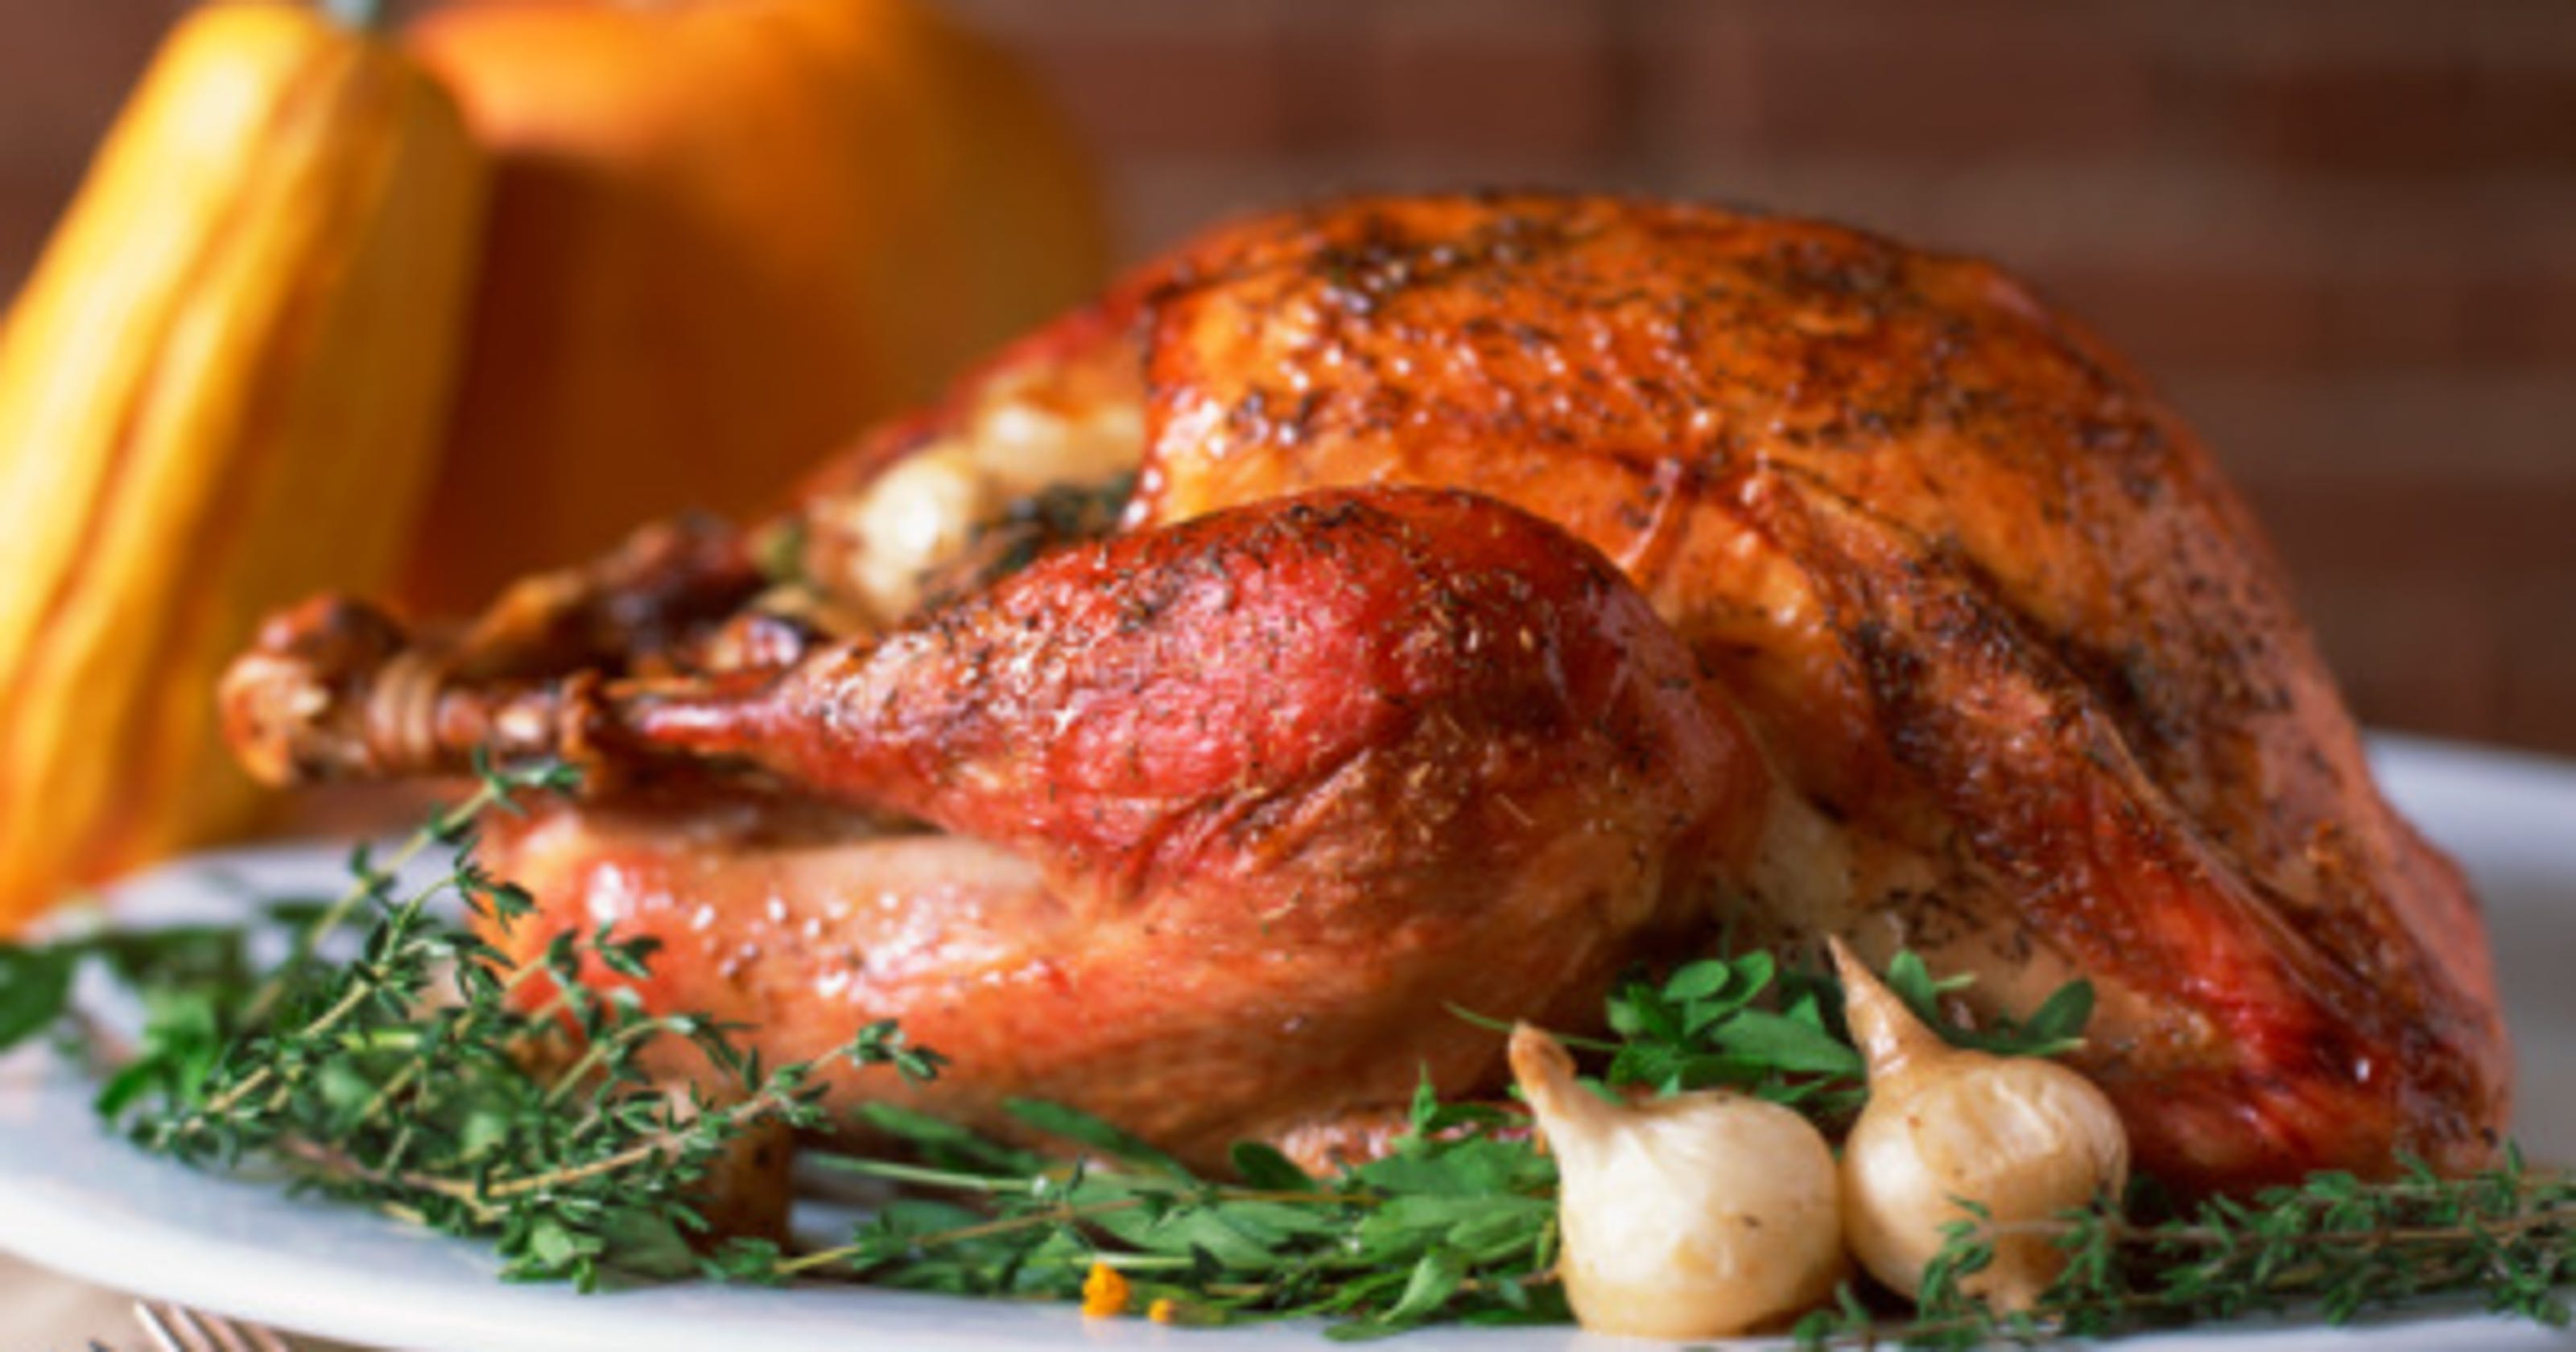 Turkey 101 Avoid Making Your Guests Sick This Thanksgiving